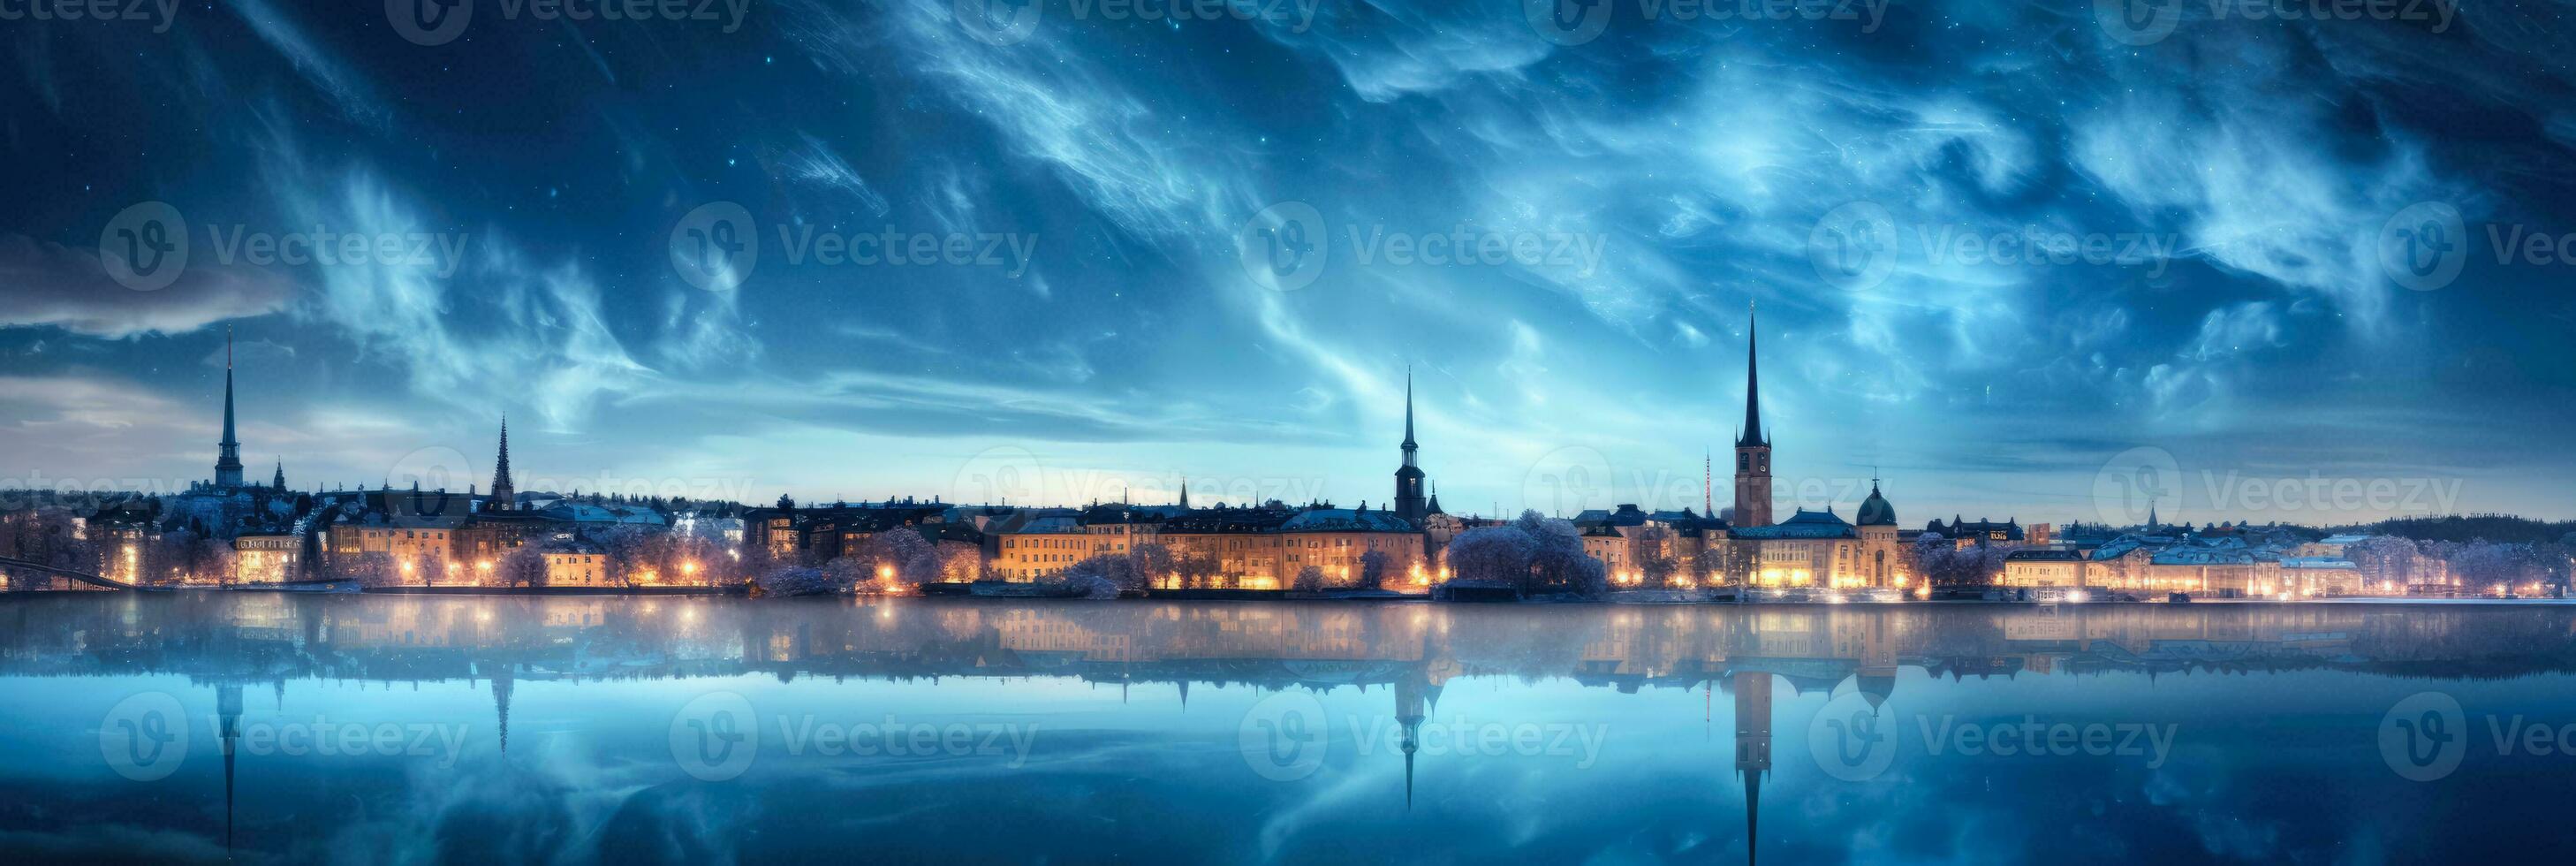 Scandinavian capitals shimmer with icy Christmas beauty under dusky skies photo